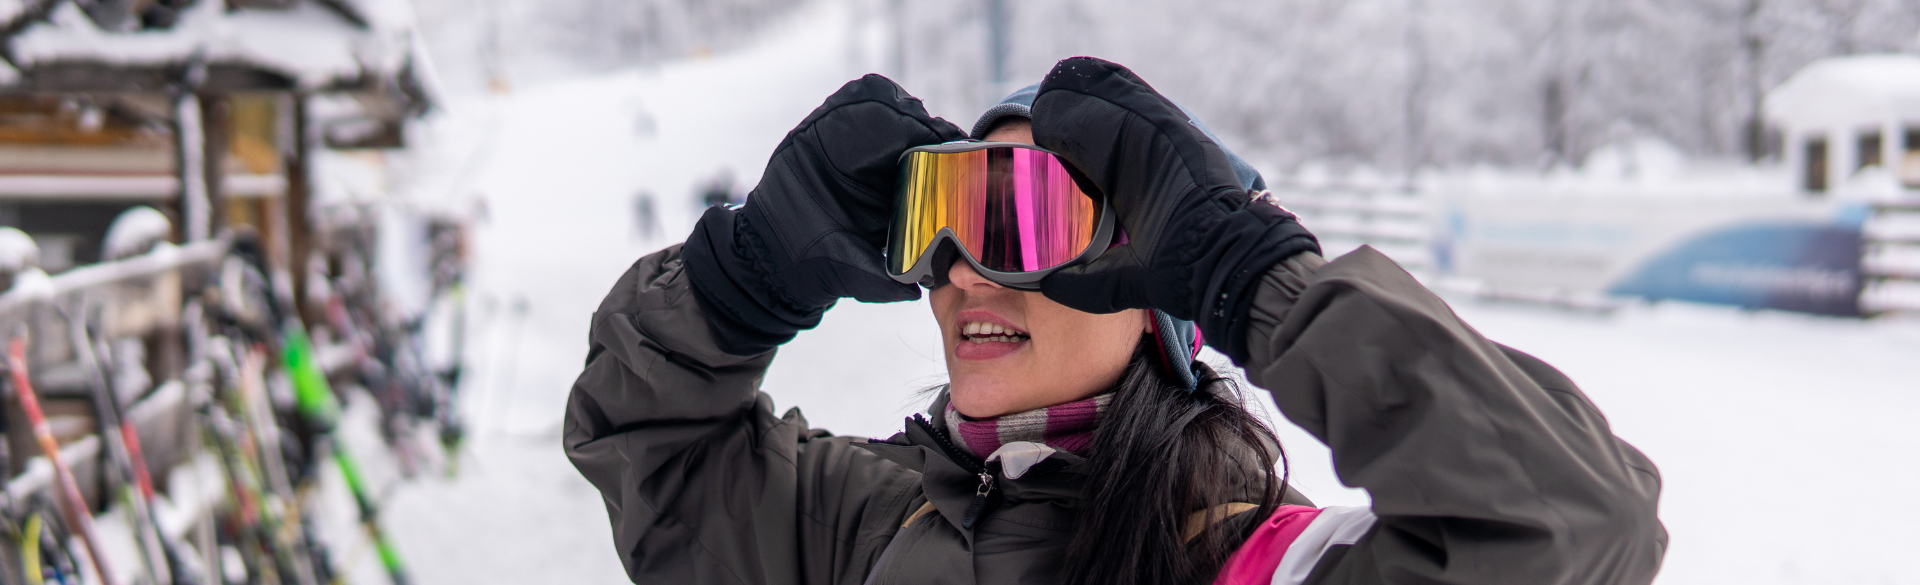 Winter is over but snow blindness risk remains